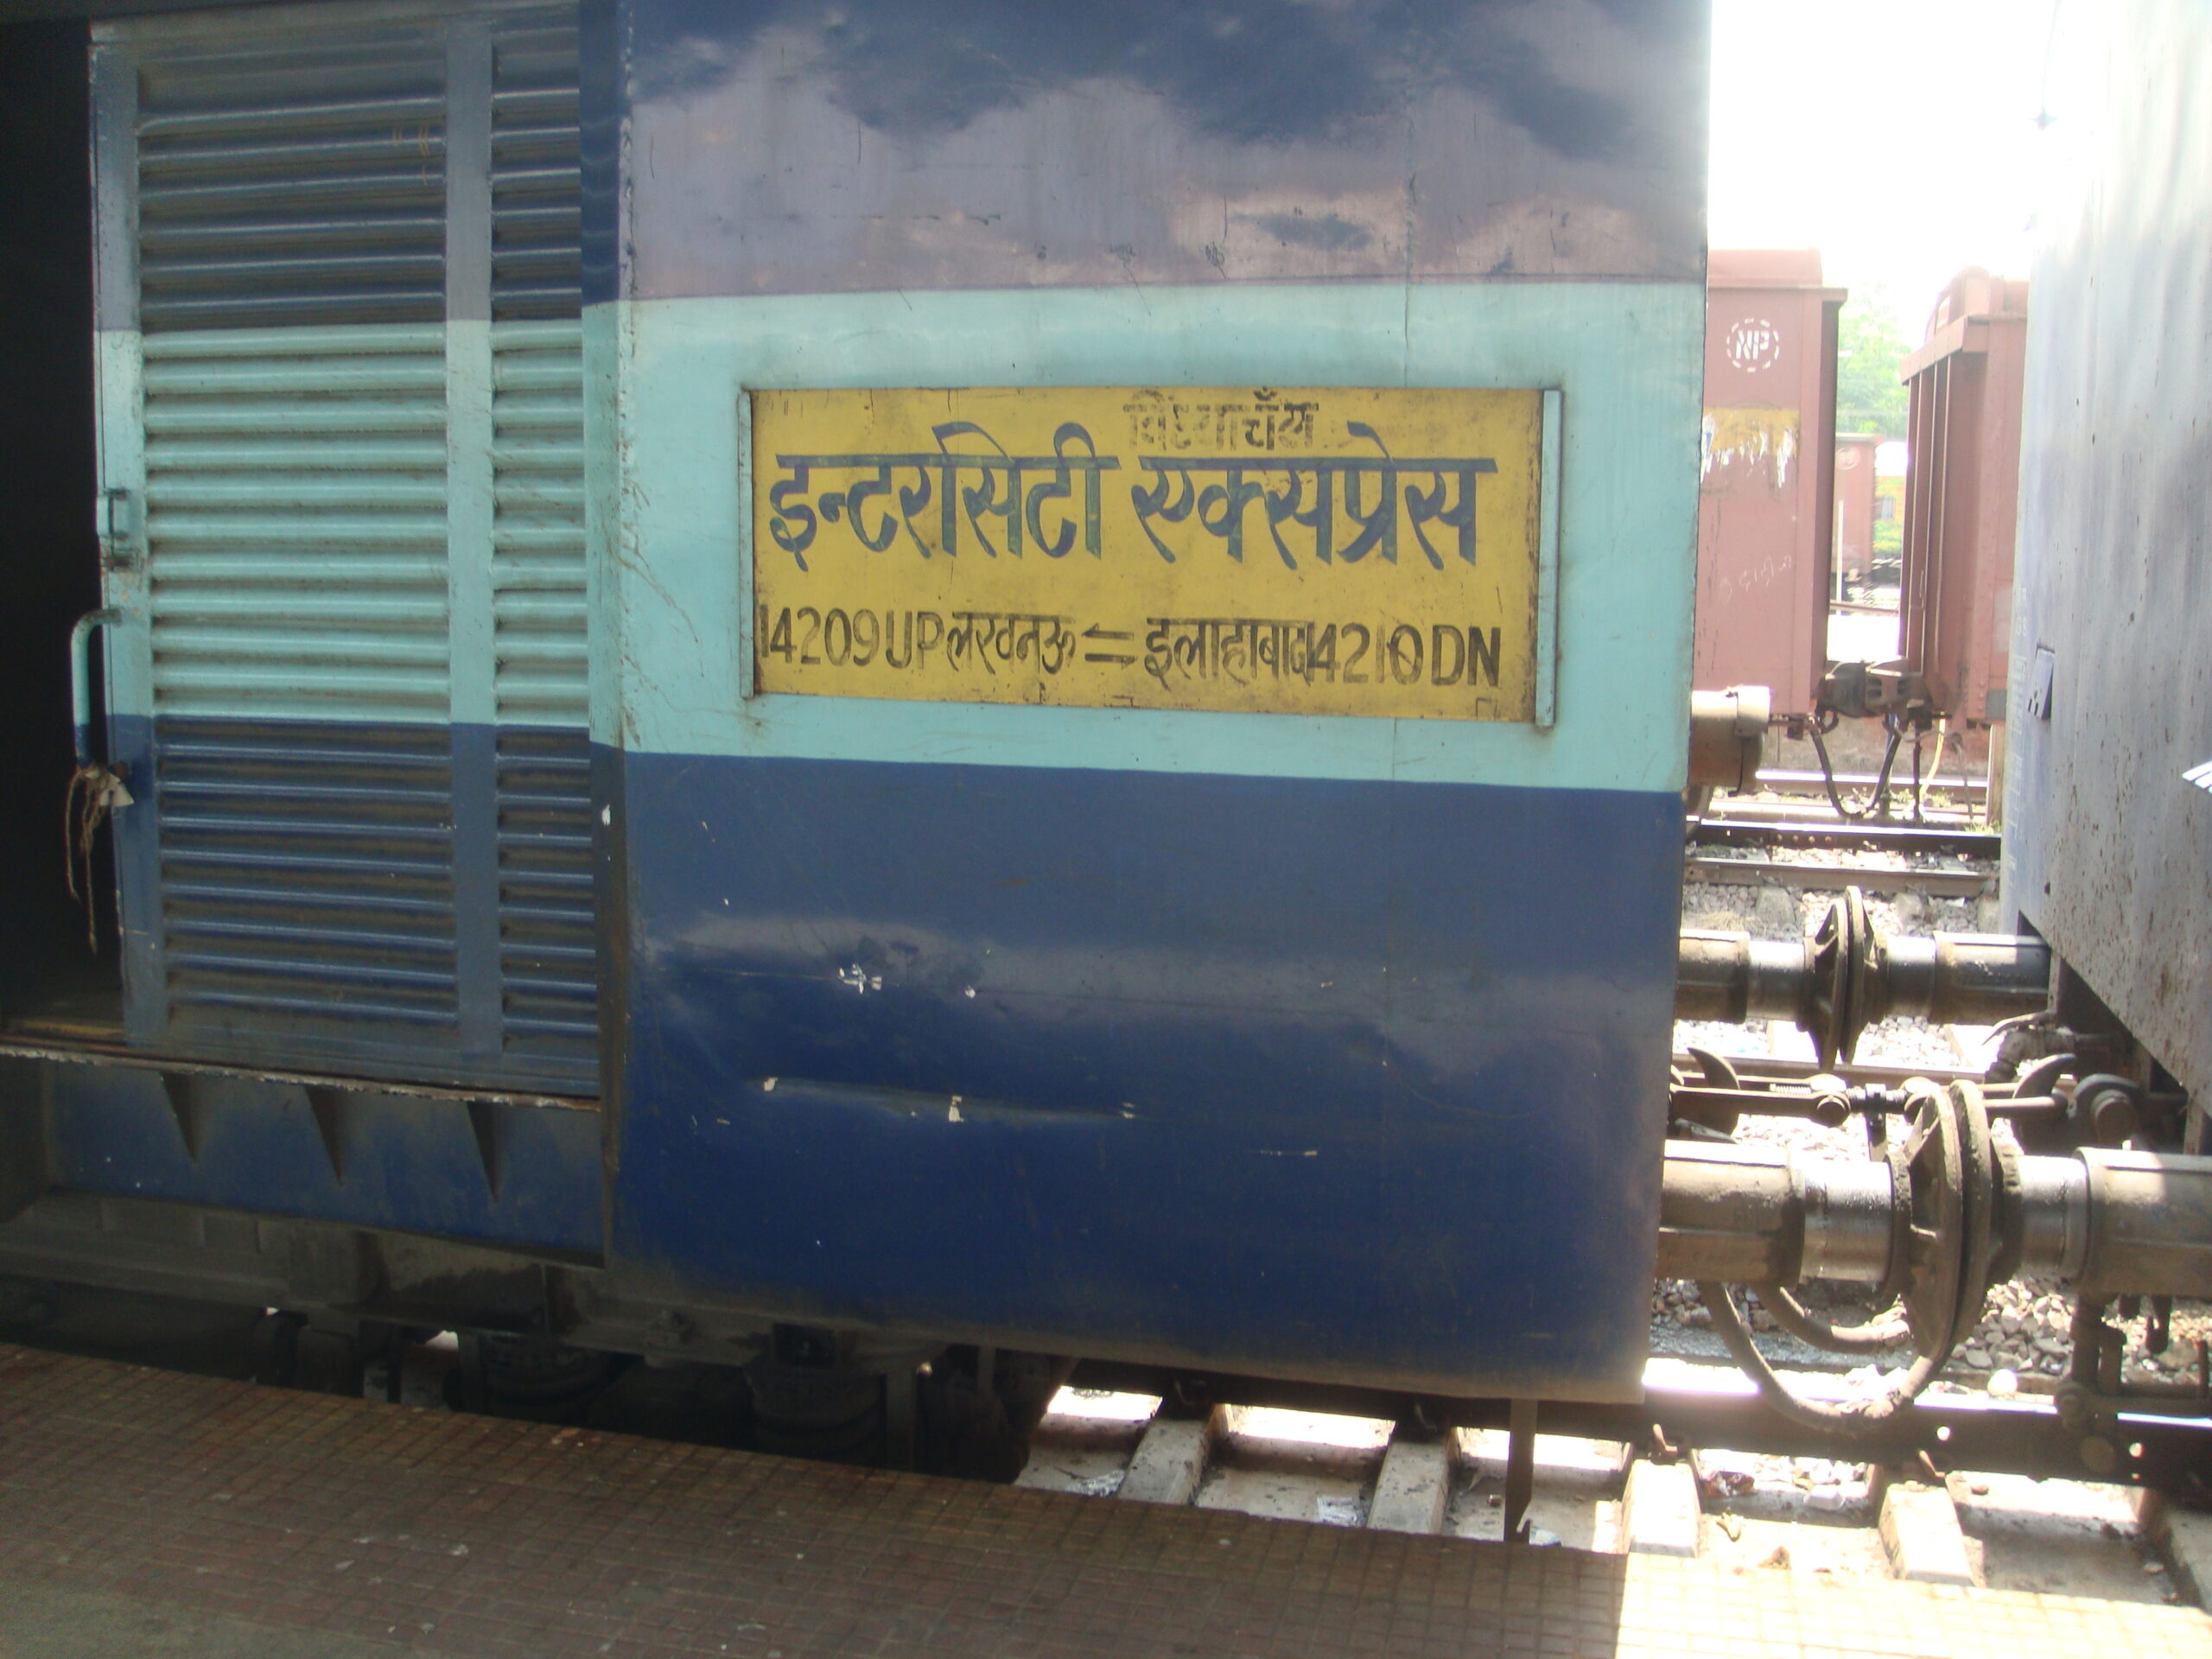 Intercity train to be replaced with Vande Bharat